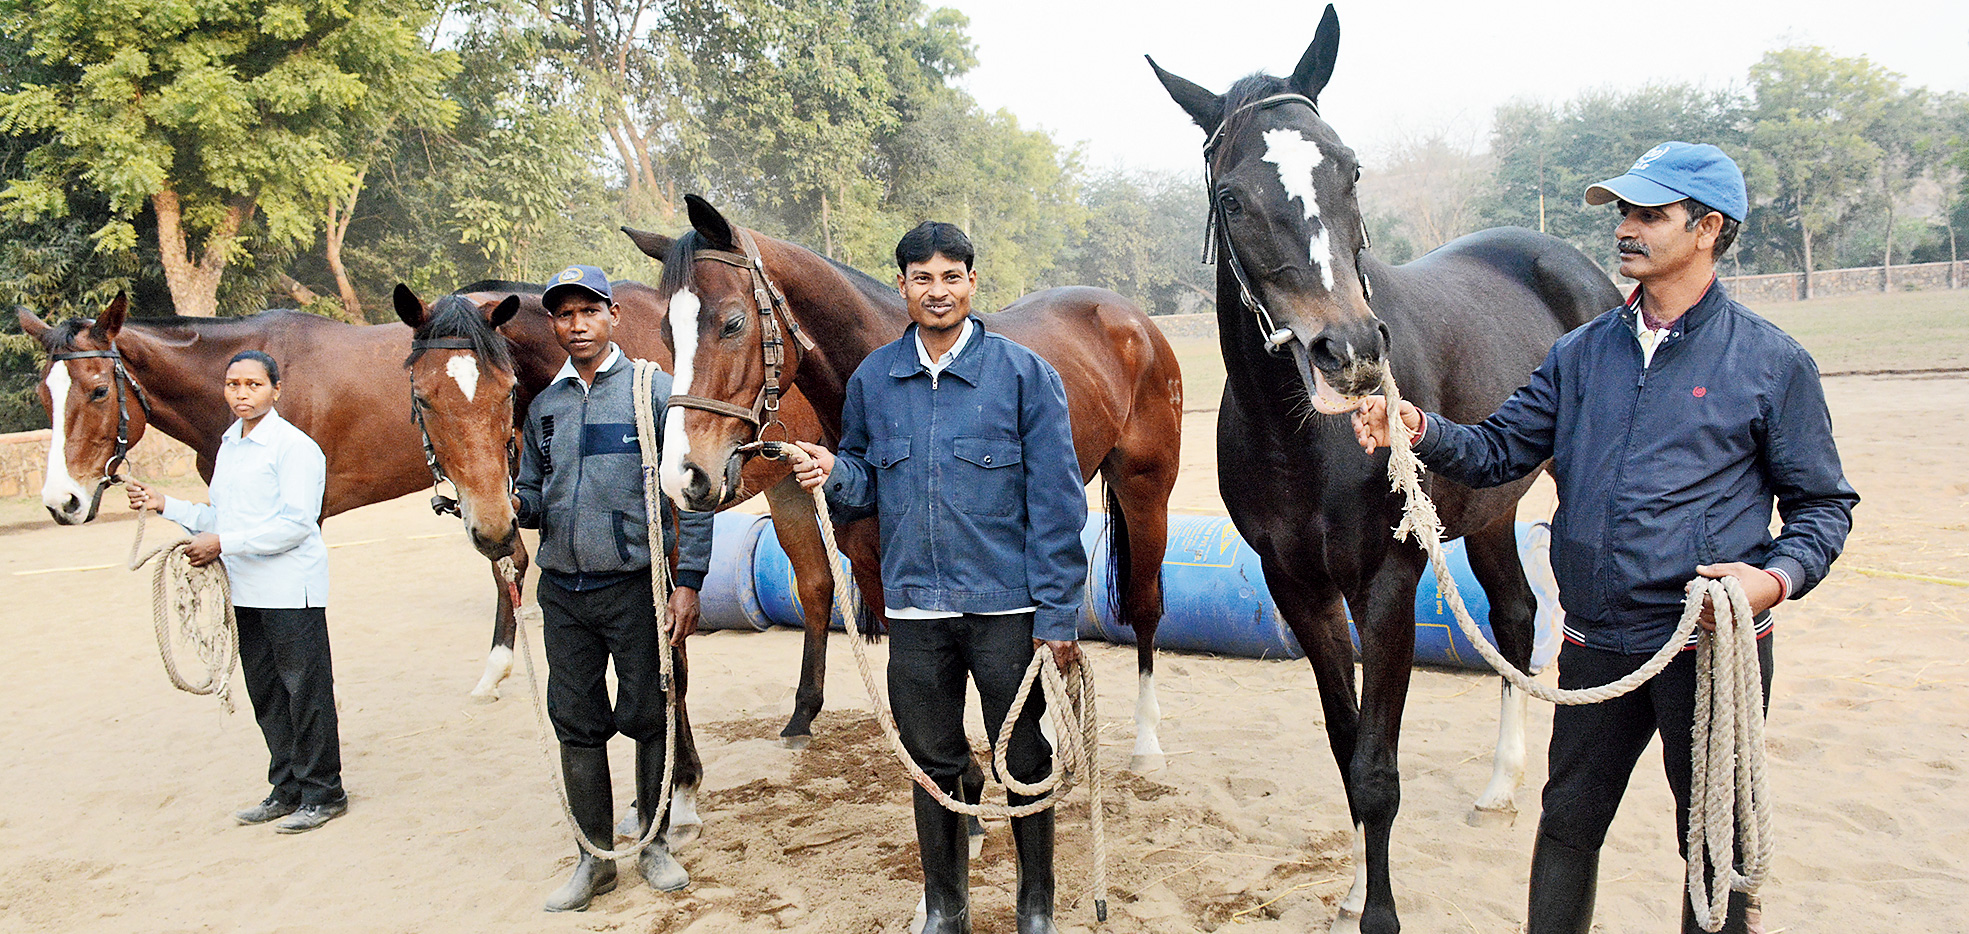 Jamshedpur riding school gets 4 horses from Calcutta